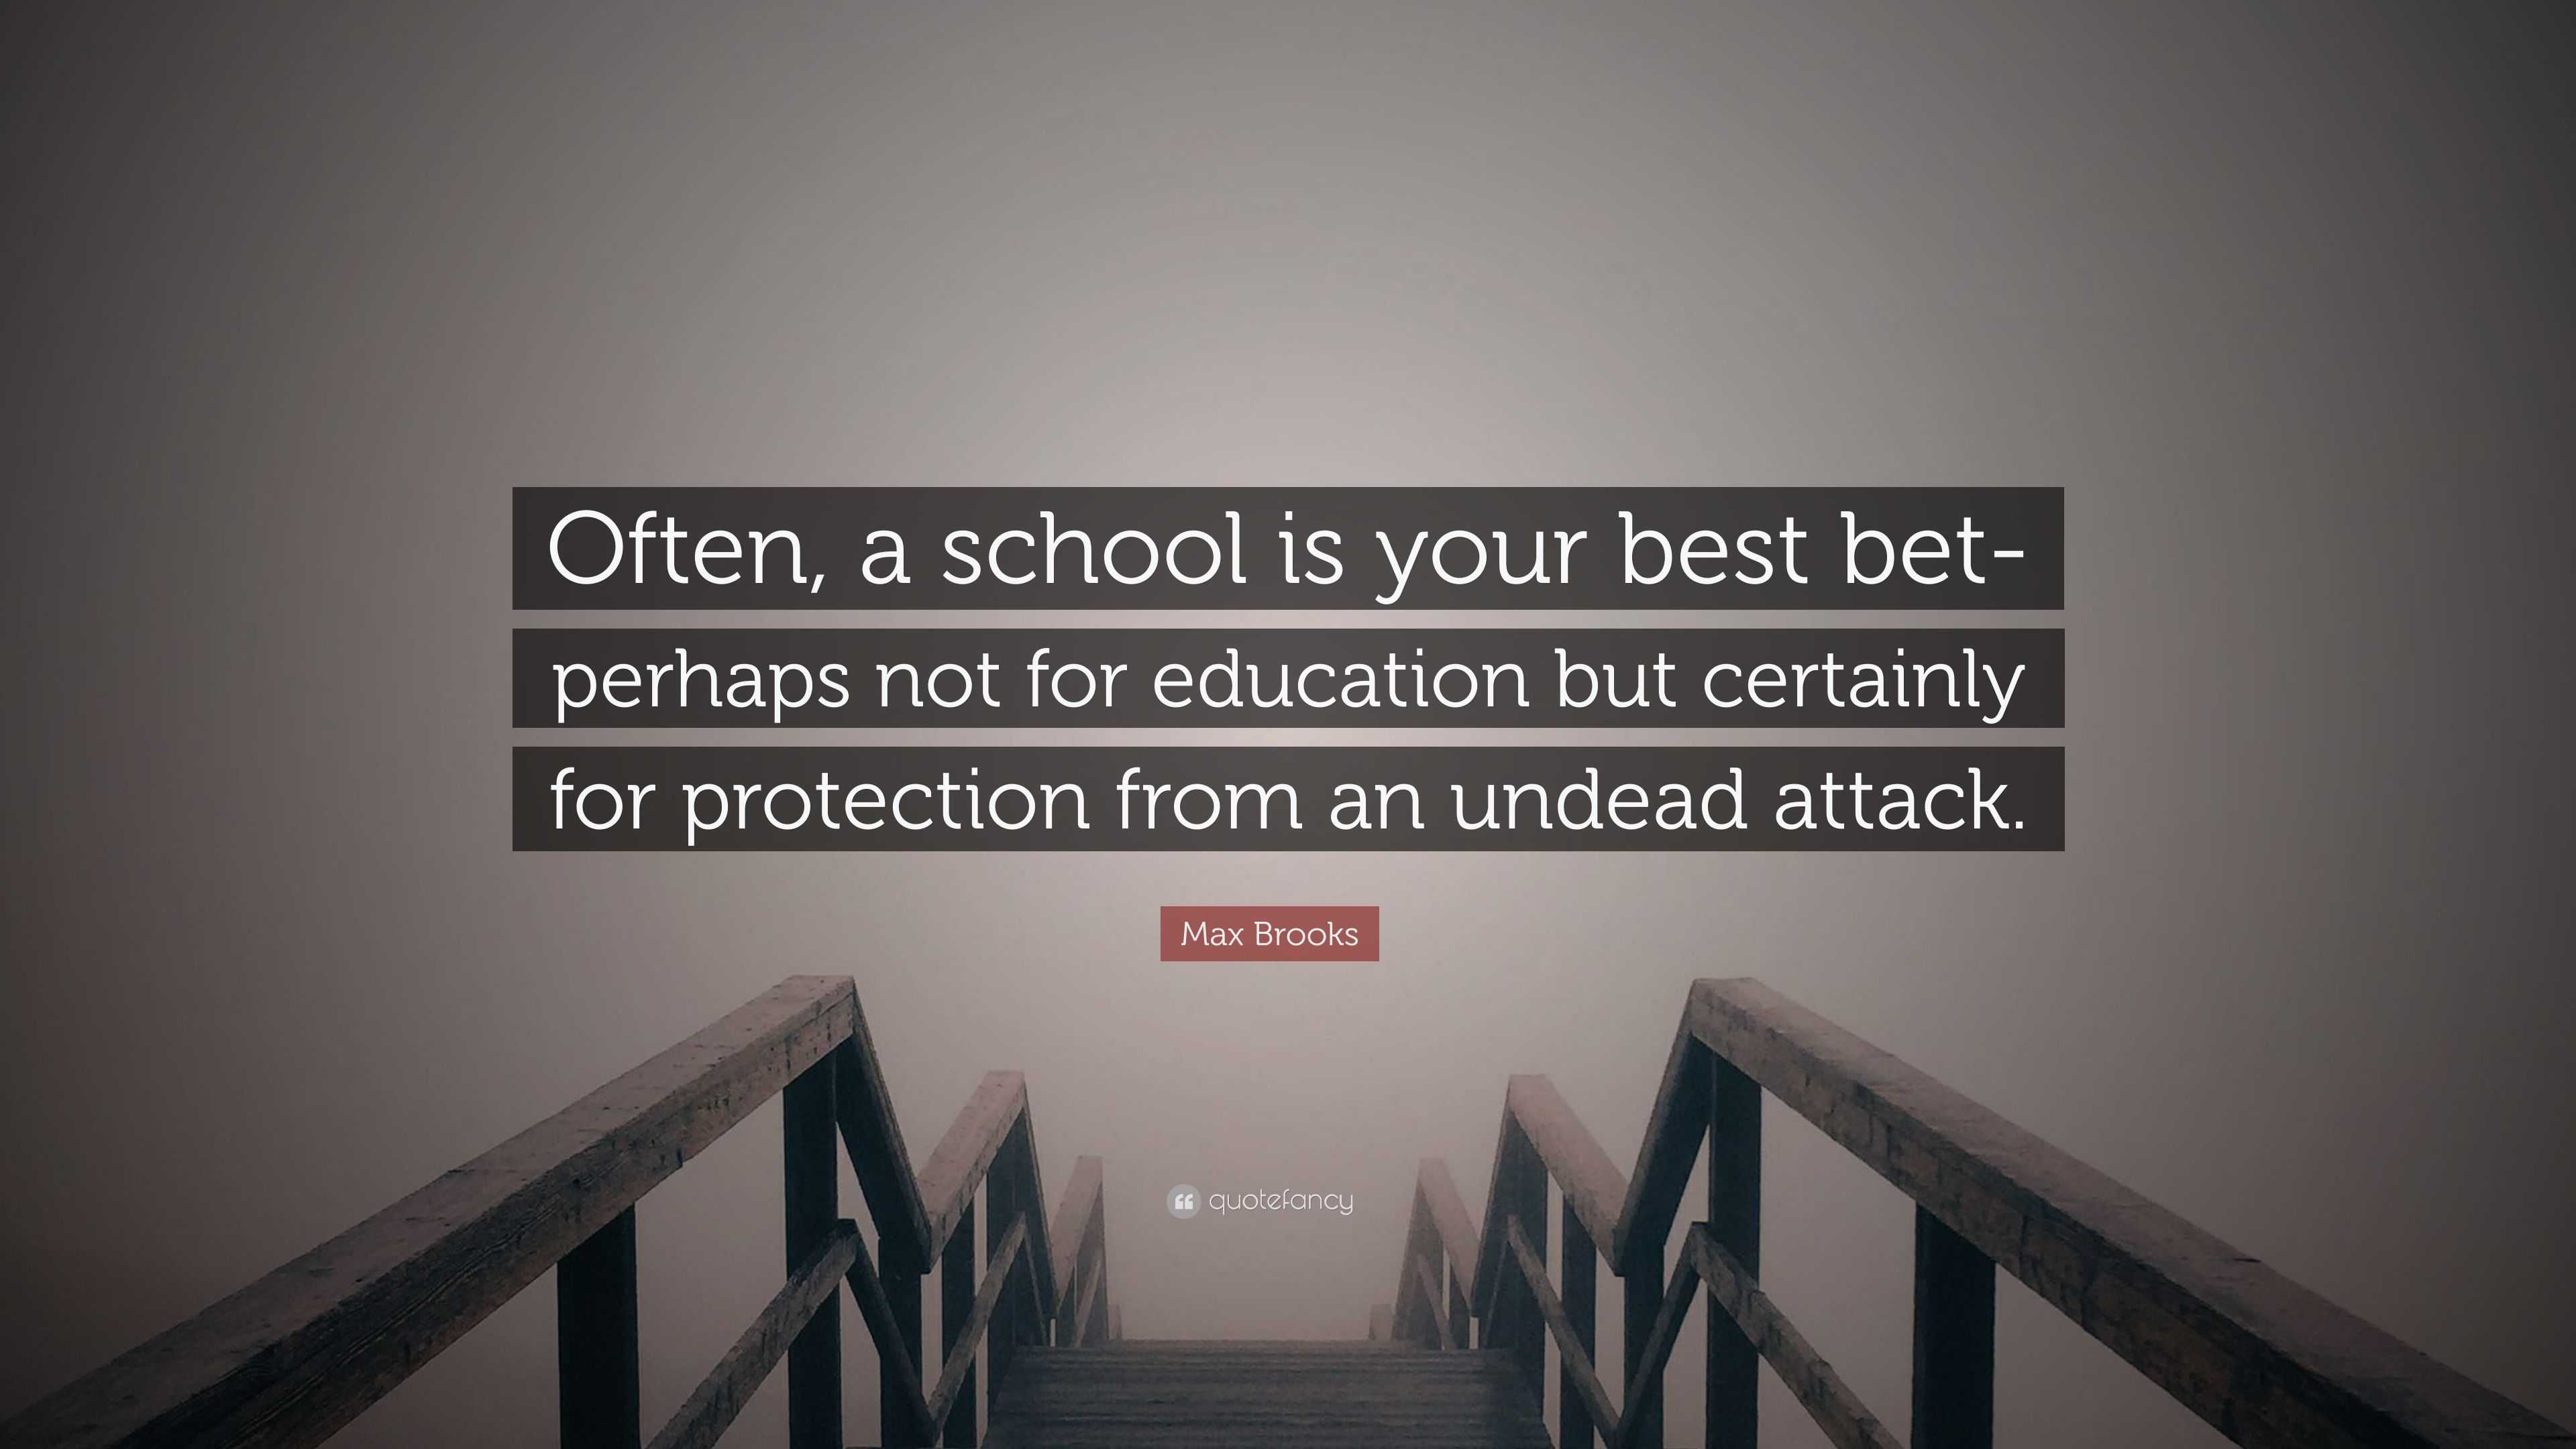 Max Brooks Quote: “Often, a school is your best bet-perhaps not